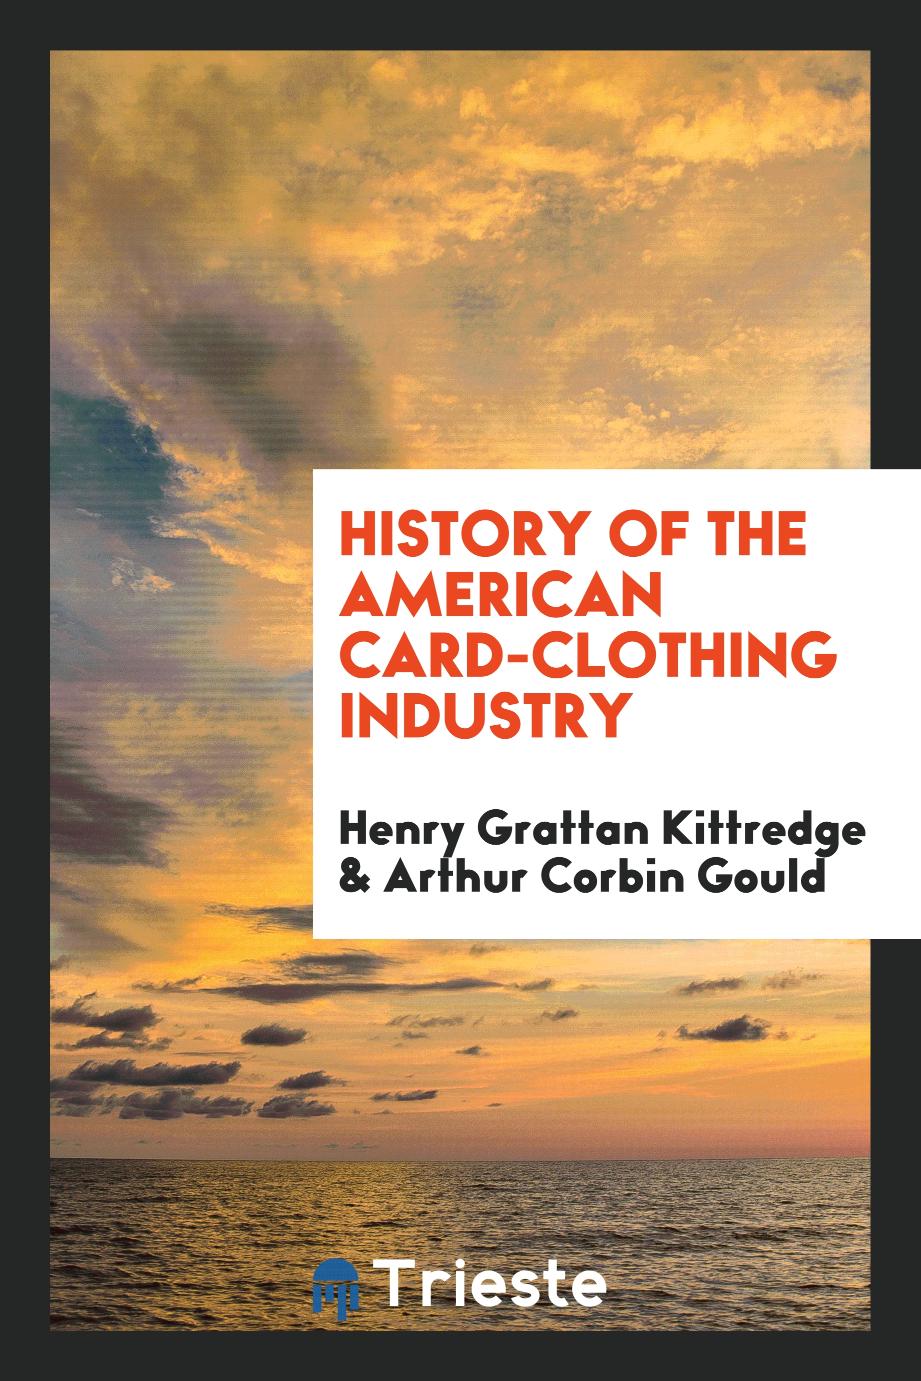 History of the American card-clothing industry